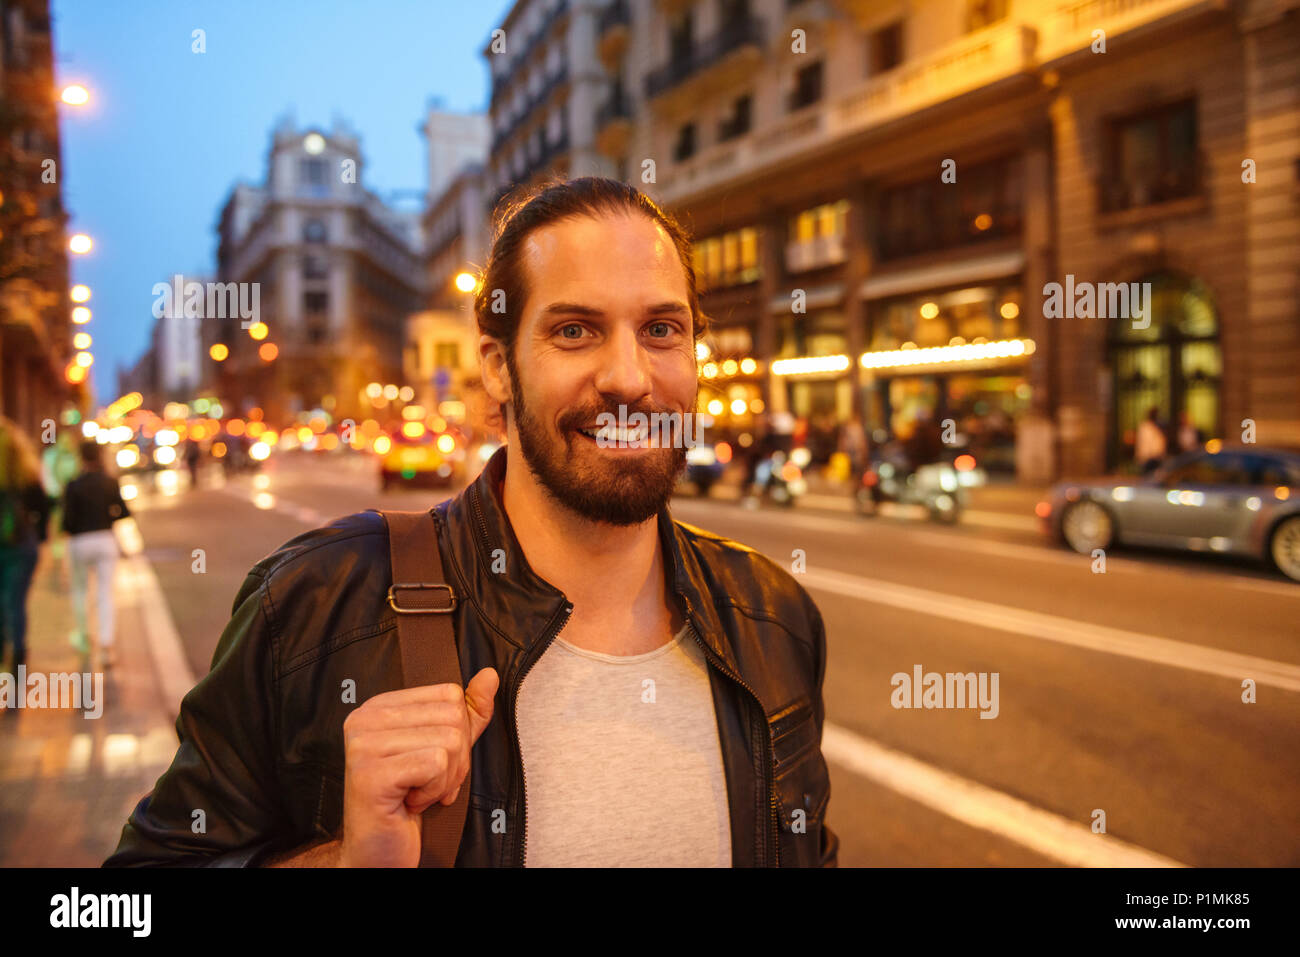 Portrait of joyful handsome man with tied hair and beard smiling while strolling in evening city across main avenue Stock Photo